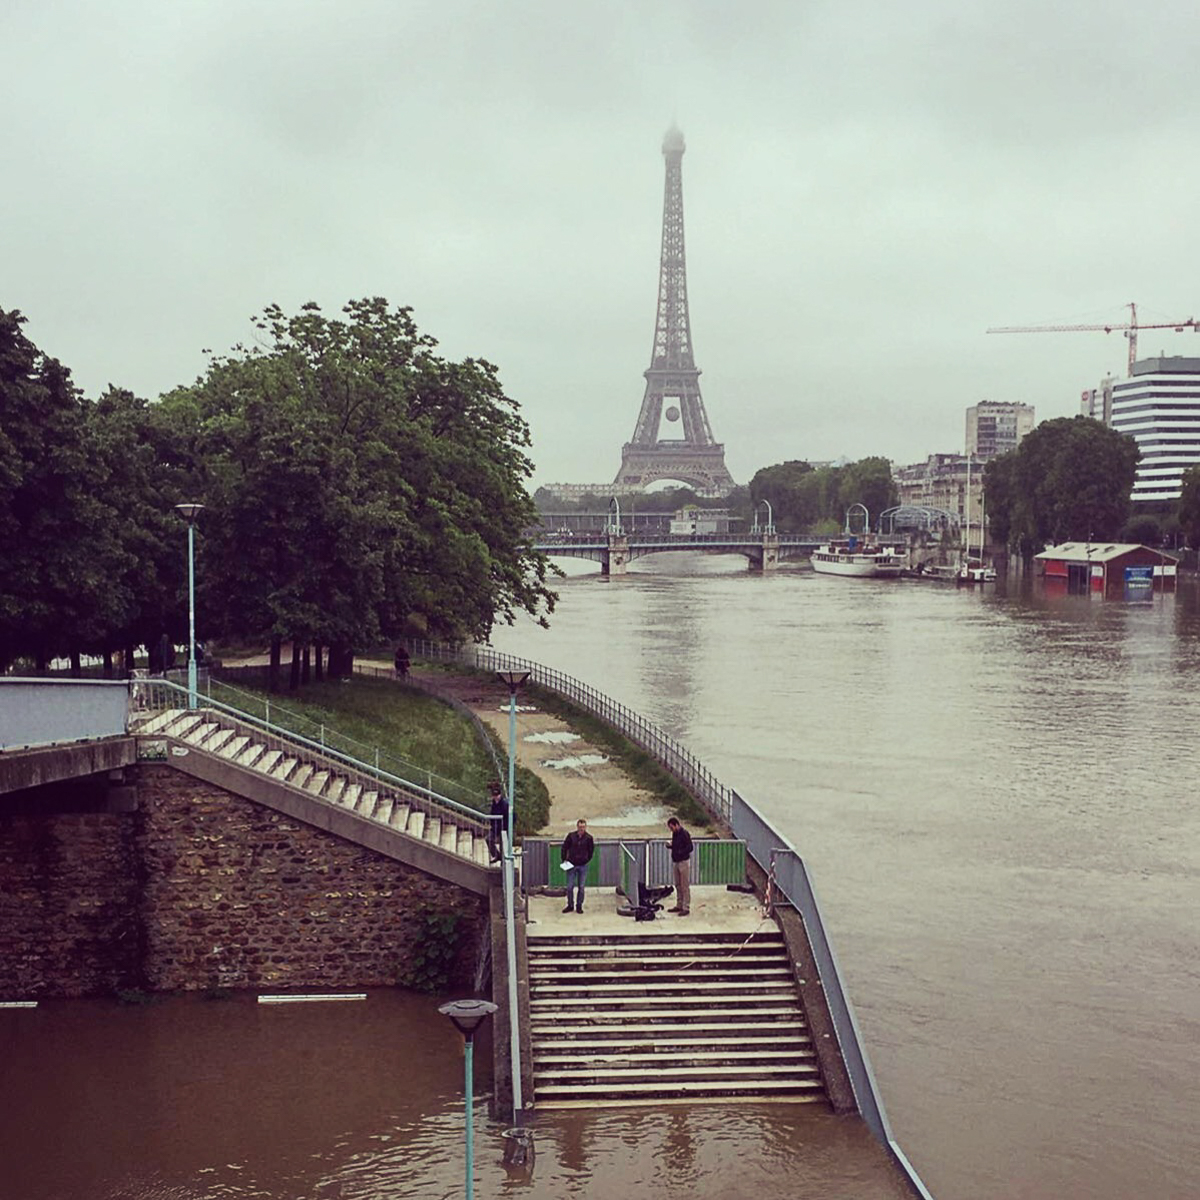 Seine level peaked at 6,2m today.